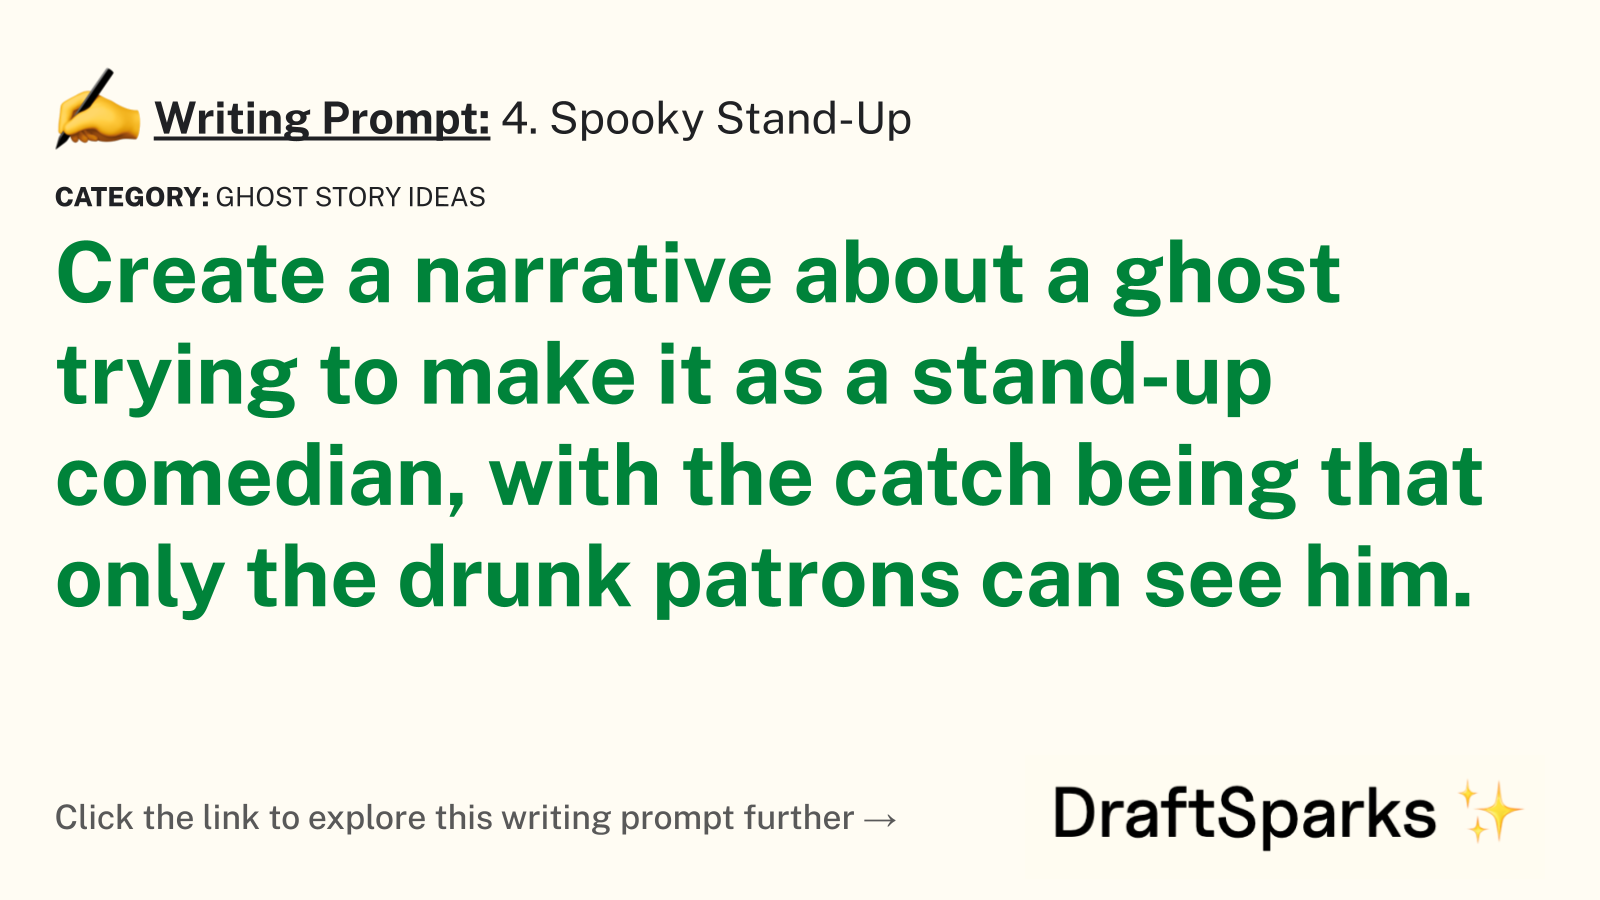 4. Spooky Stand-Up